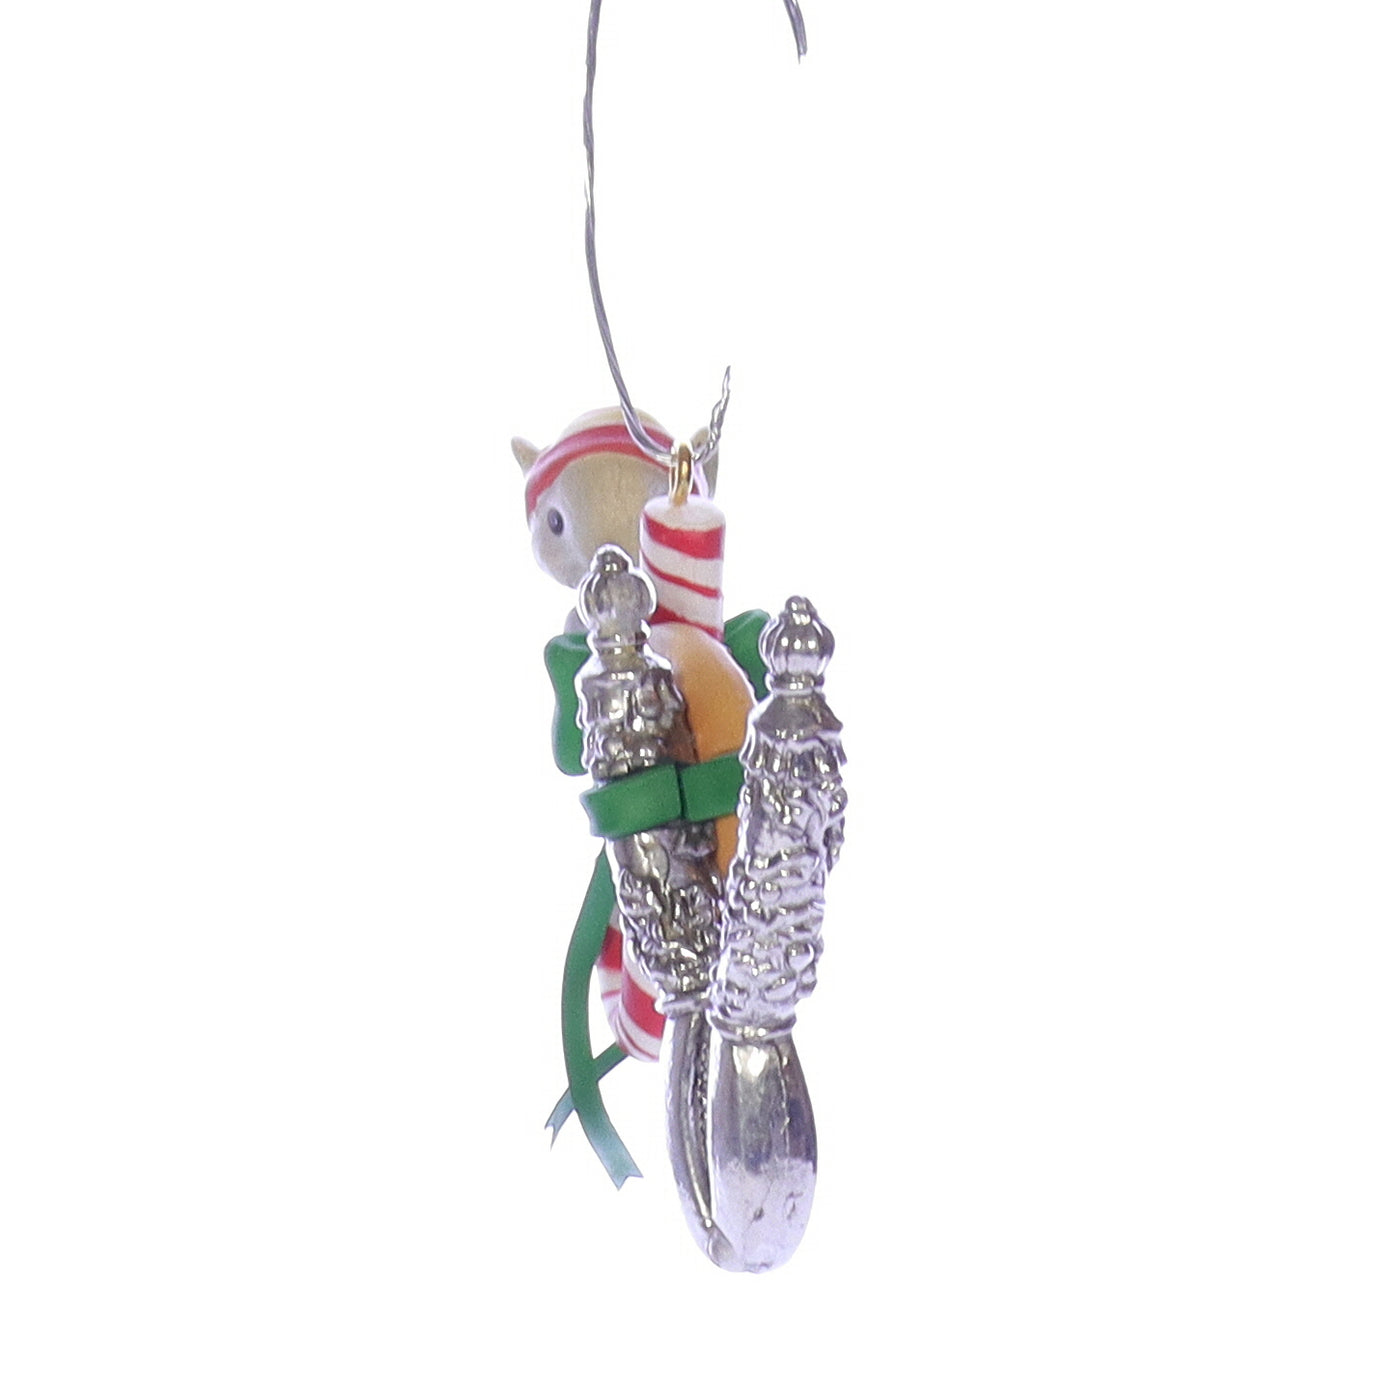 Enesco_Treasury_of_Christmas_Ornaments_830488_Tie-dings_of_Joy_Mouse_Ornament_1991 Right View